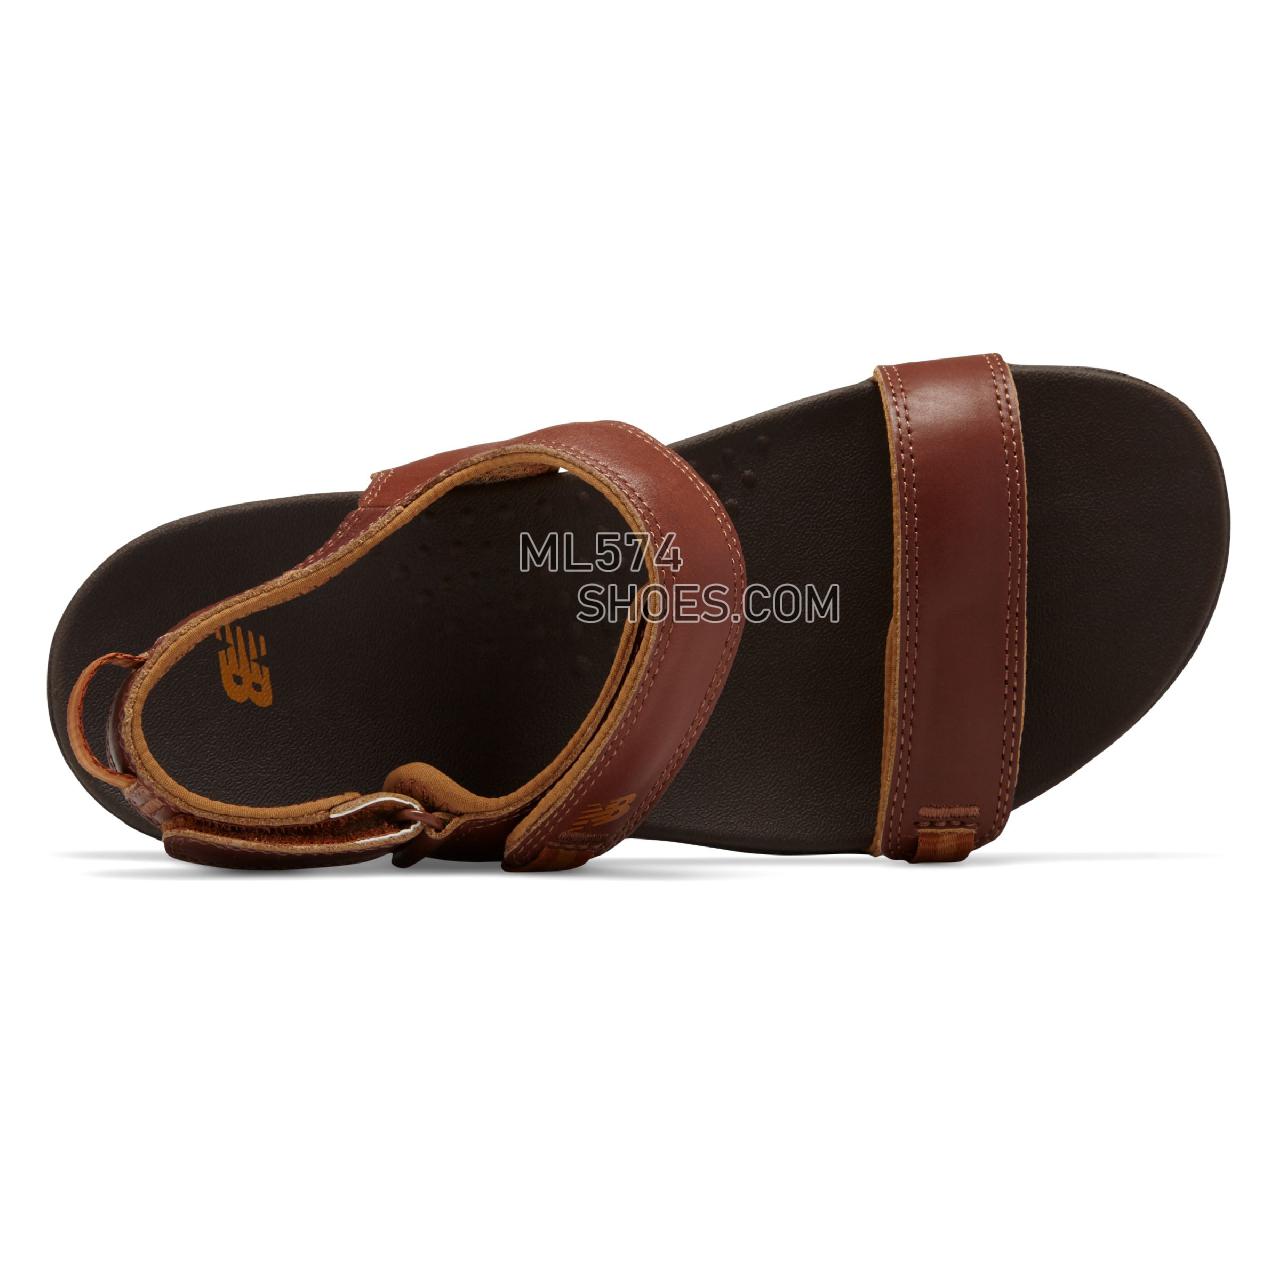 New Balance Traverse Leather Sandal - Women's 2102 - Sandals Brown - WR2102WSK